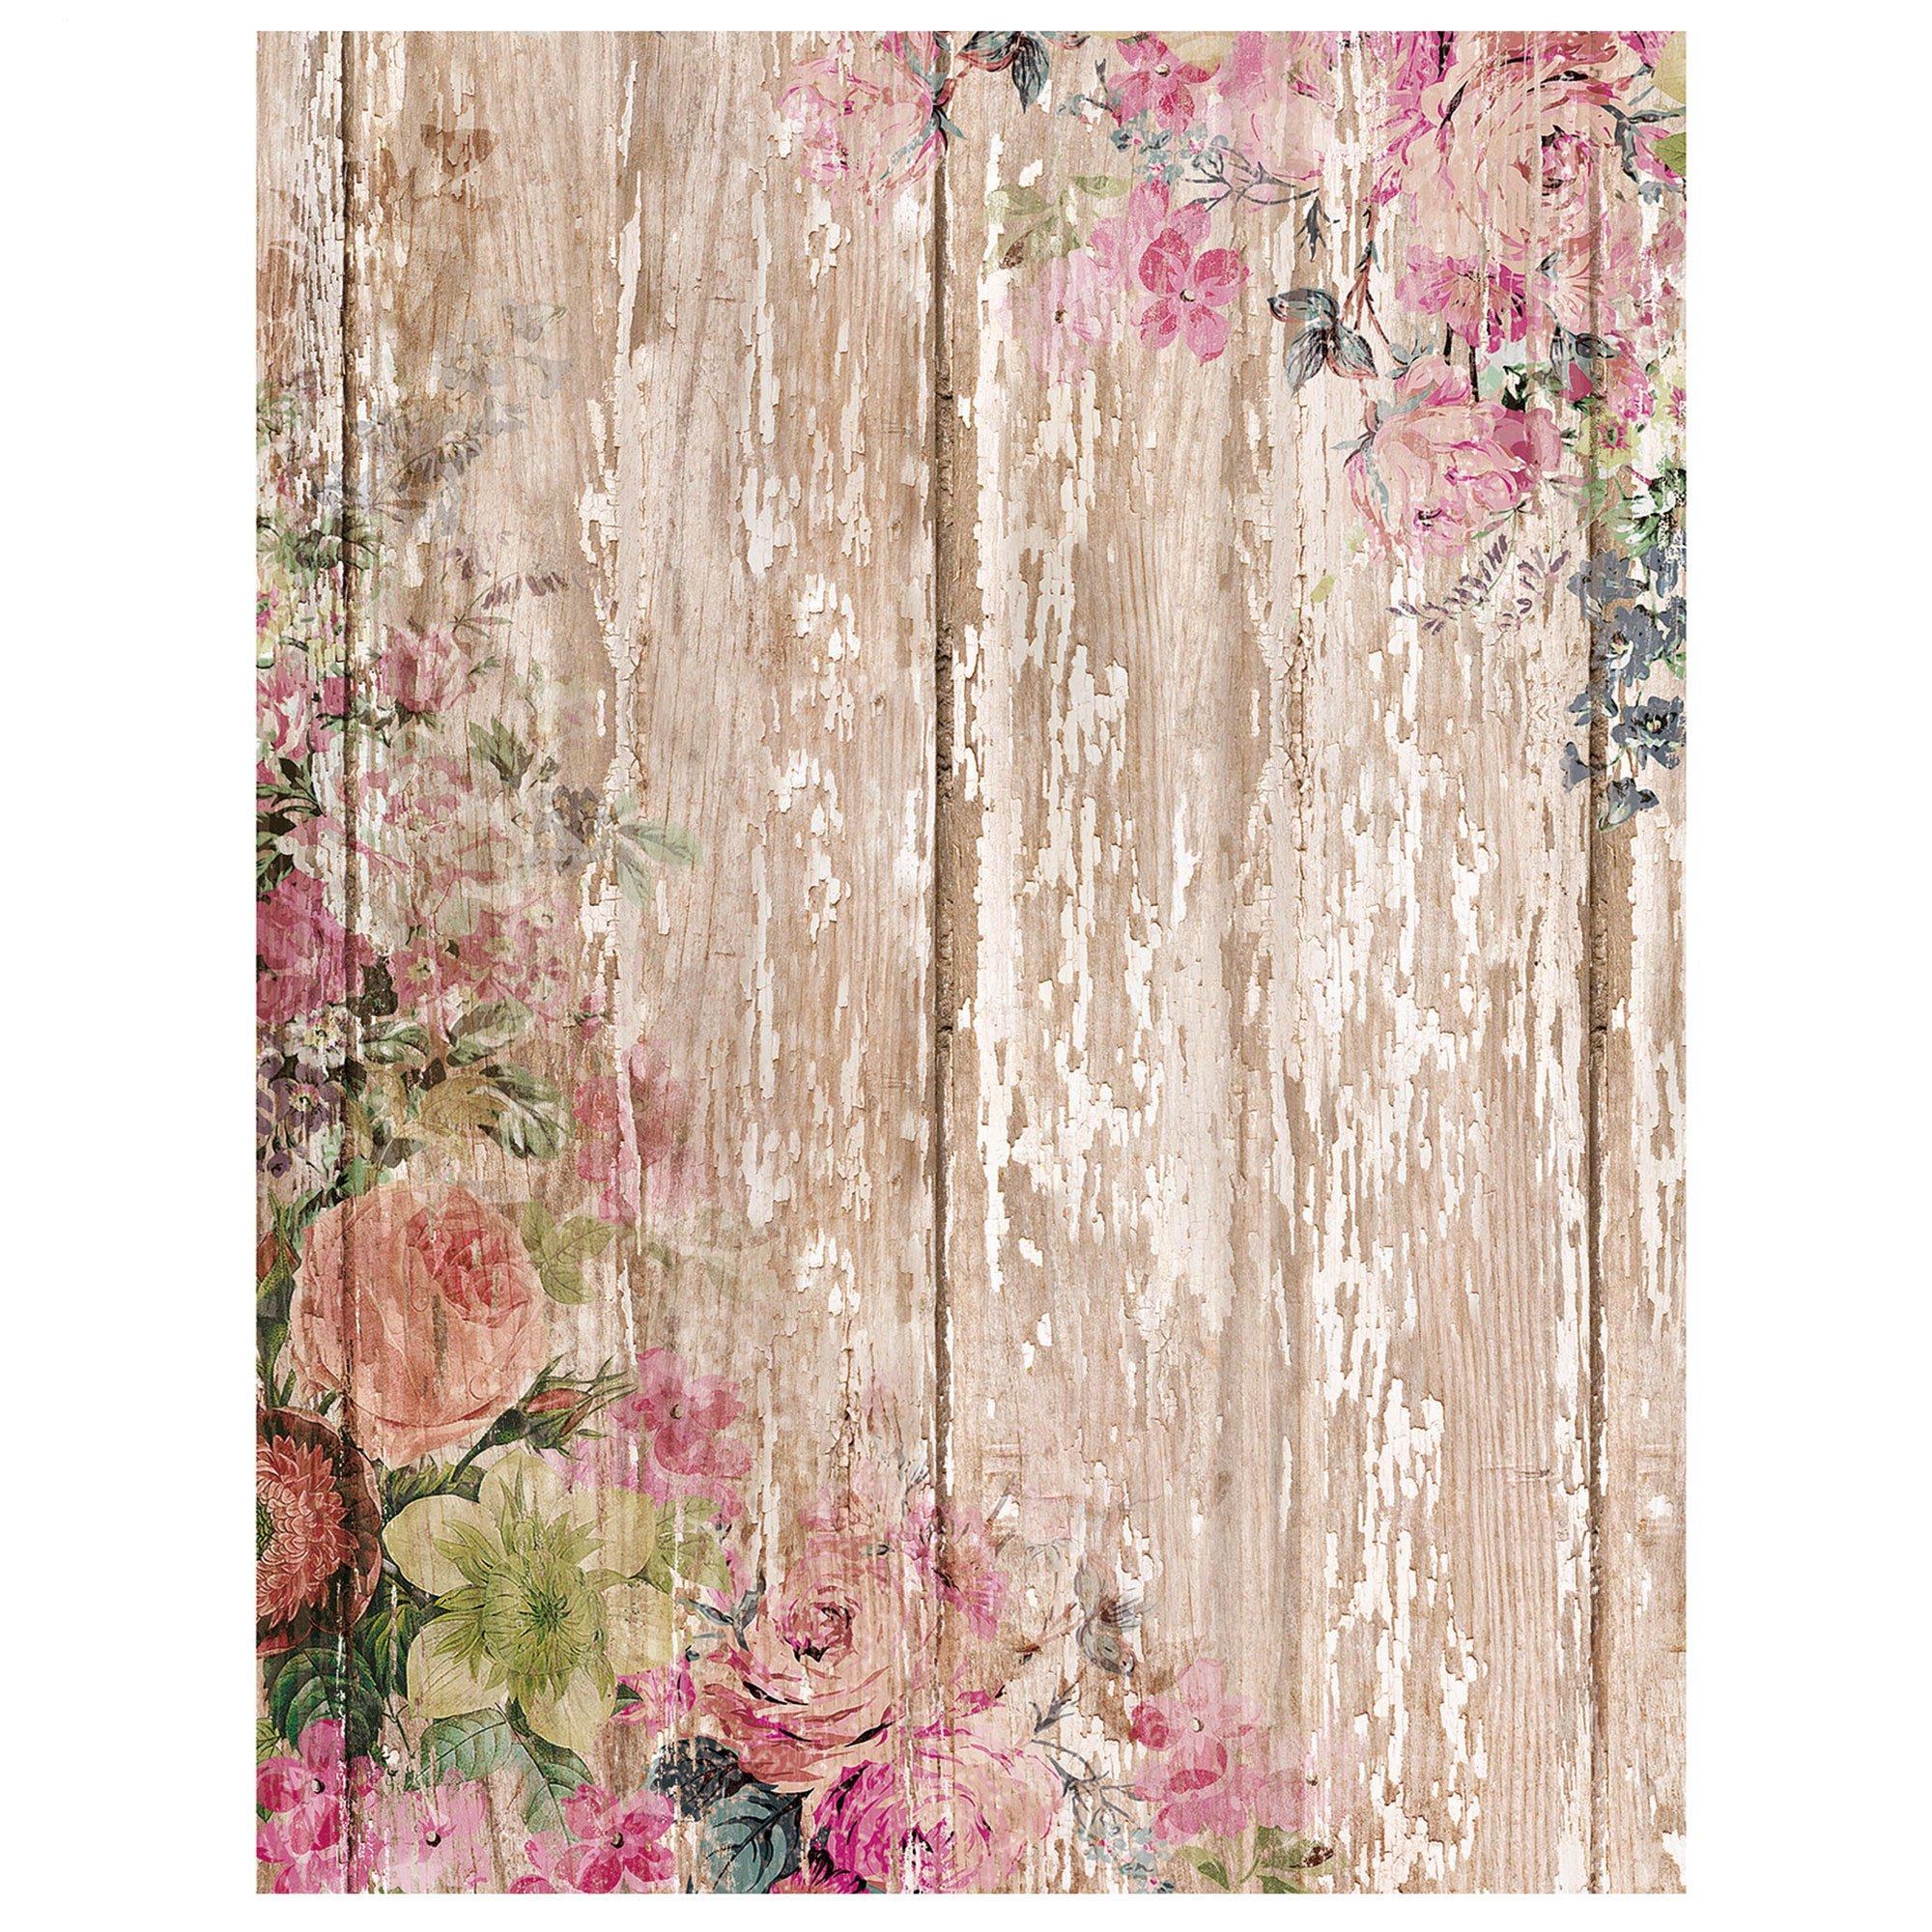 Love & Lace Floral Print 12x12 Scrapbook Paper - 5 Sheets – Country Croppers